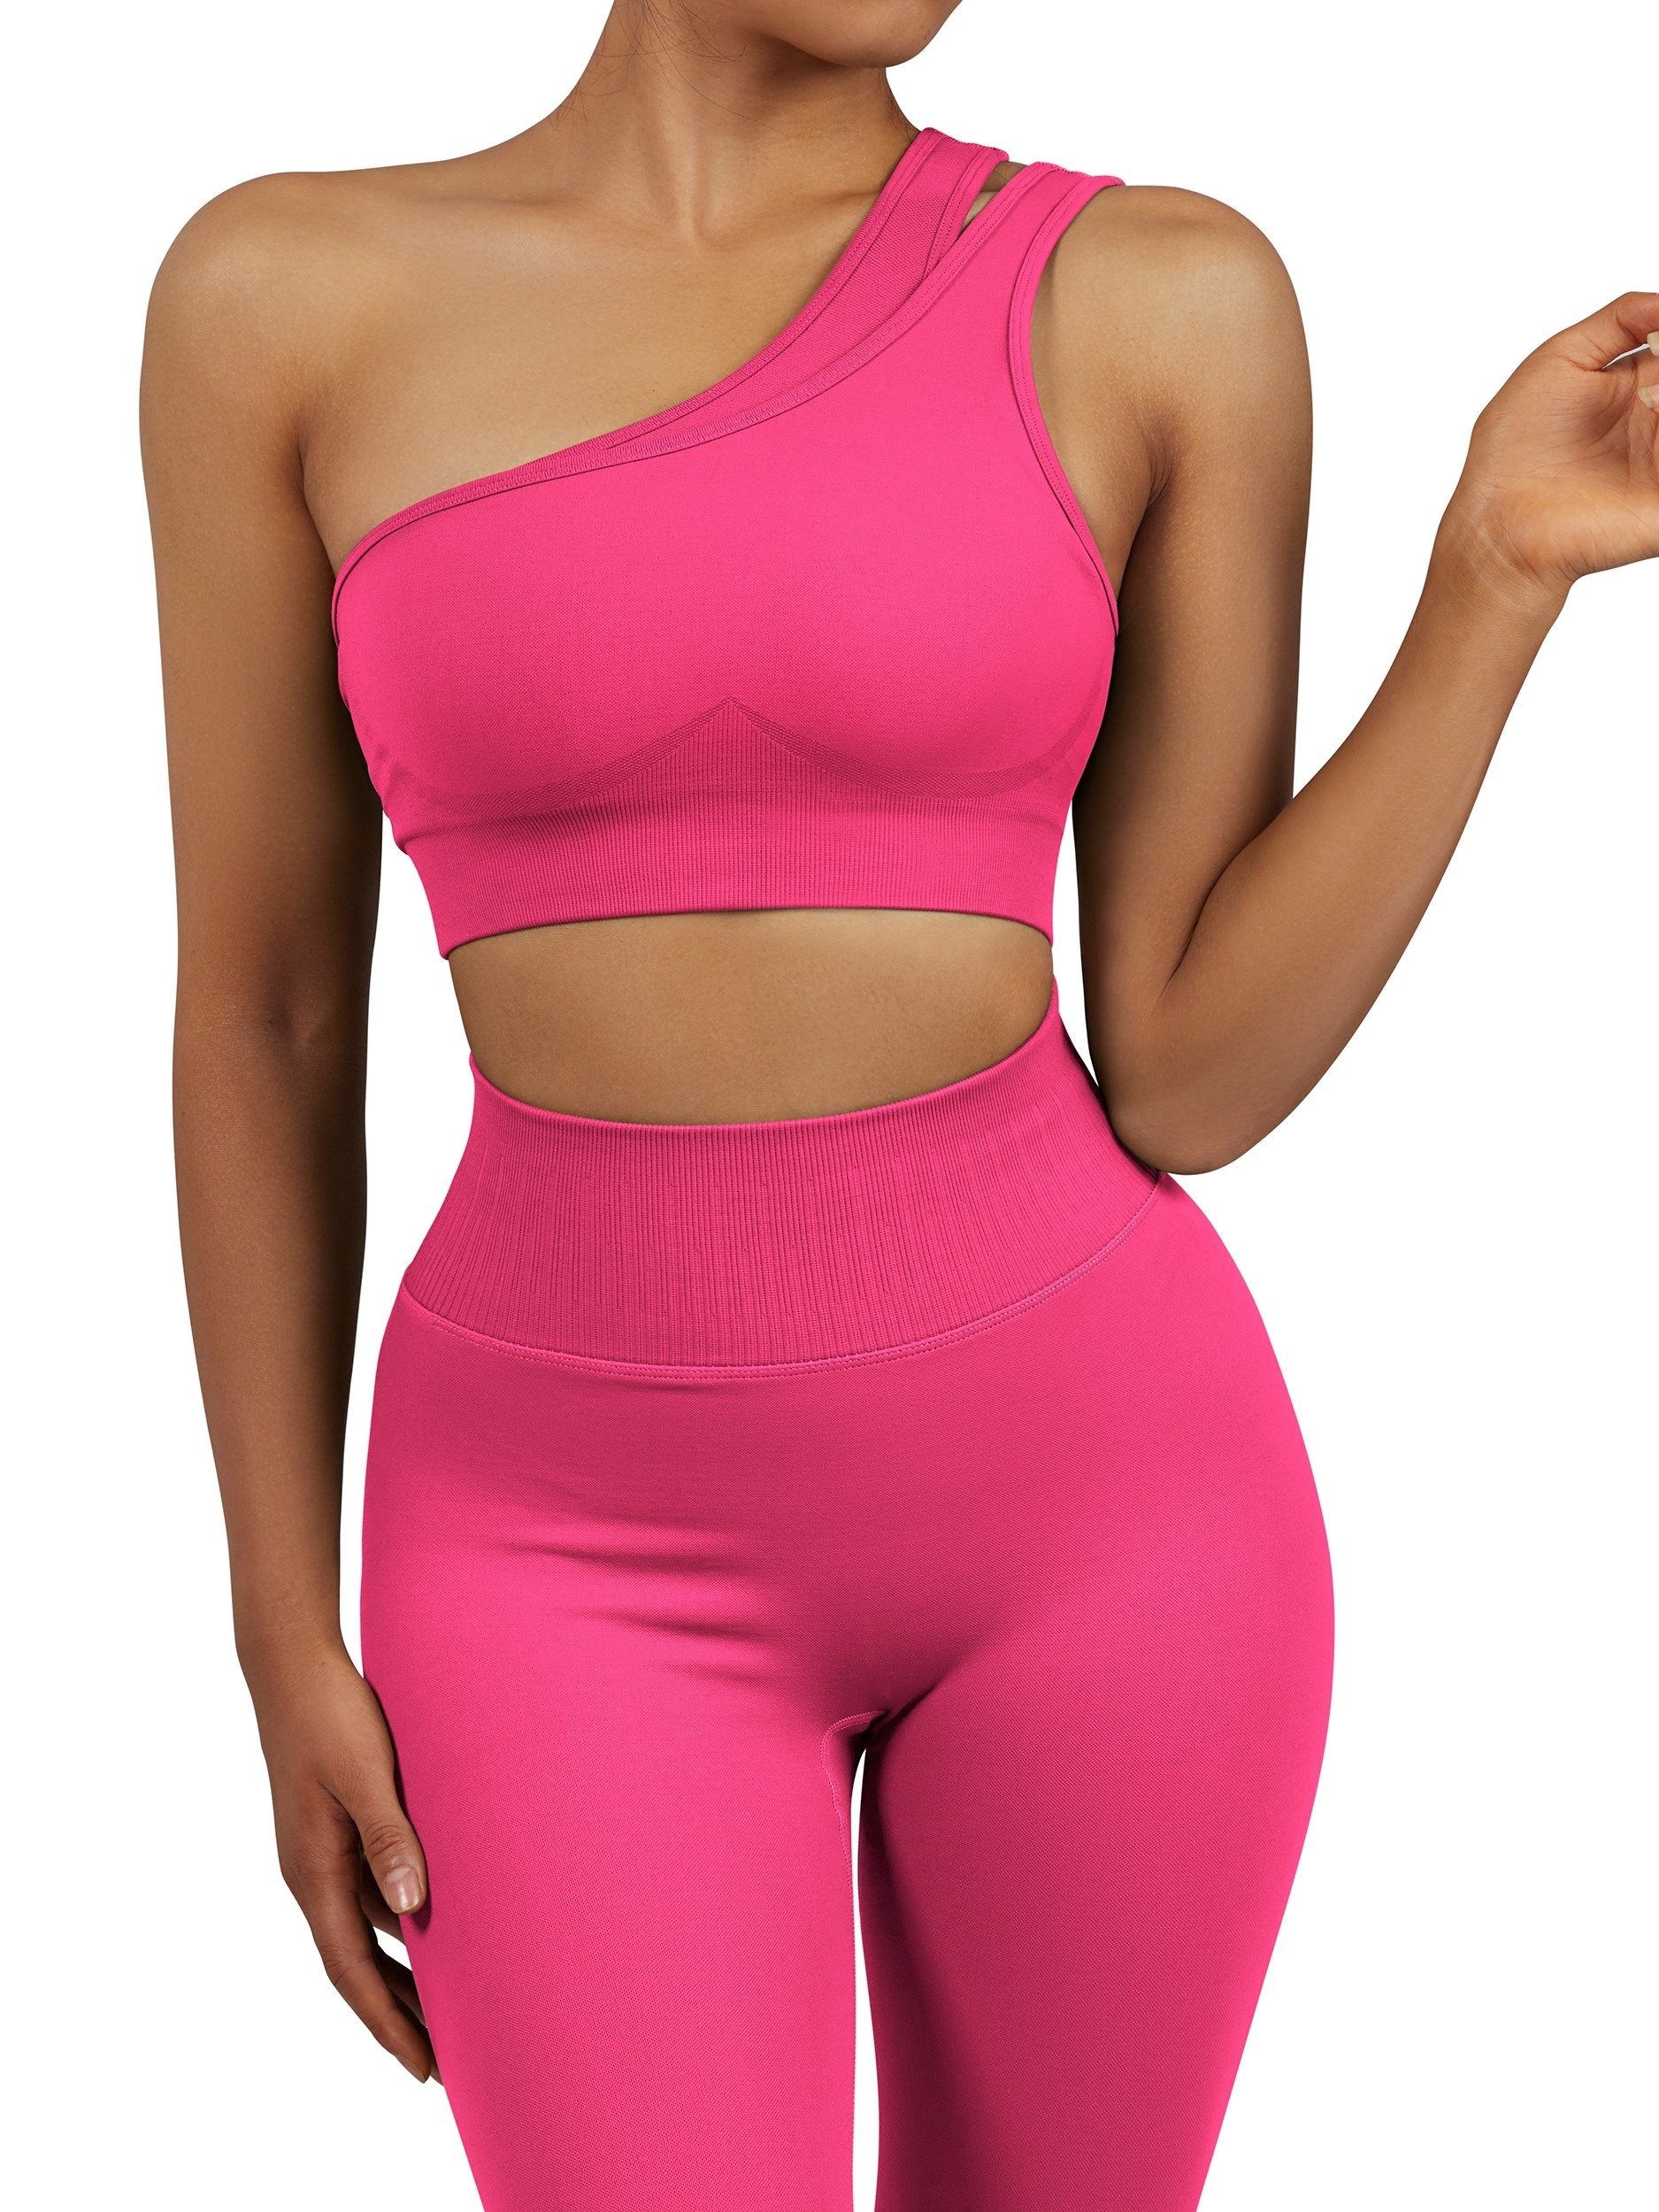 Women's Activewear Set Workout Sets 2 Piece Cropped Color Block Sports Bra  Leggings Pink Spandex Yoga Fitness Gym Workout High Waist Tummy Control But